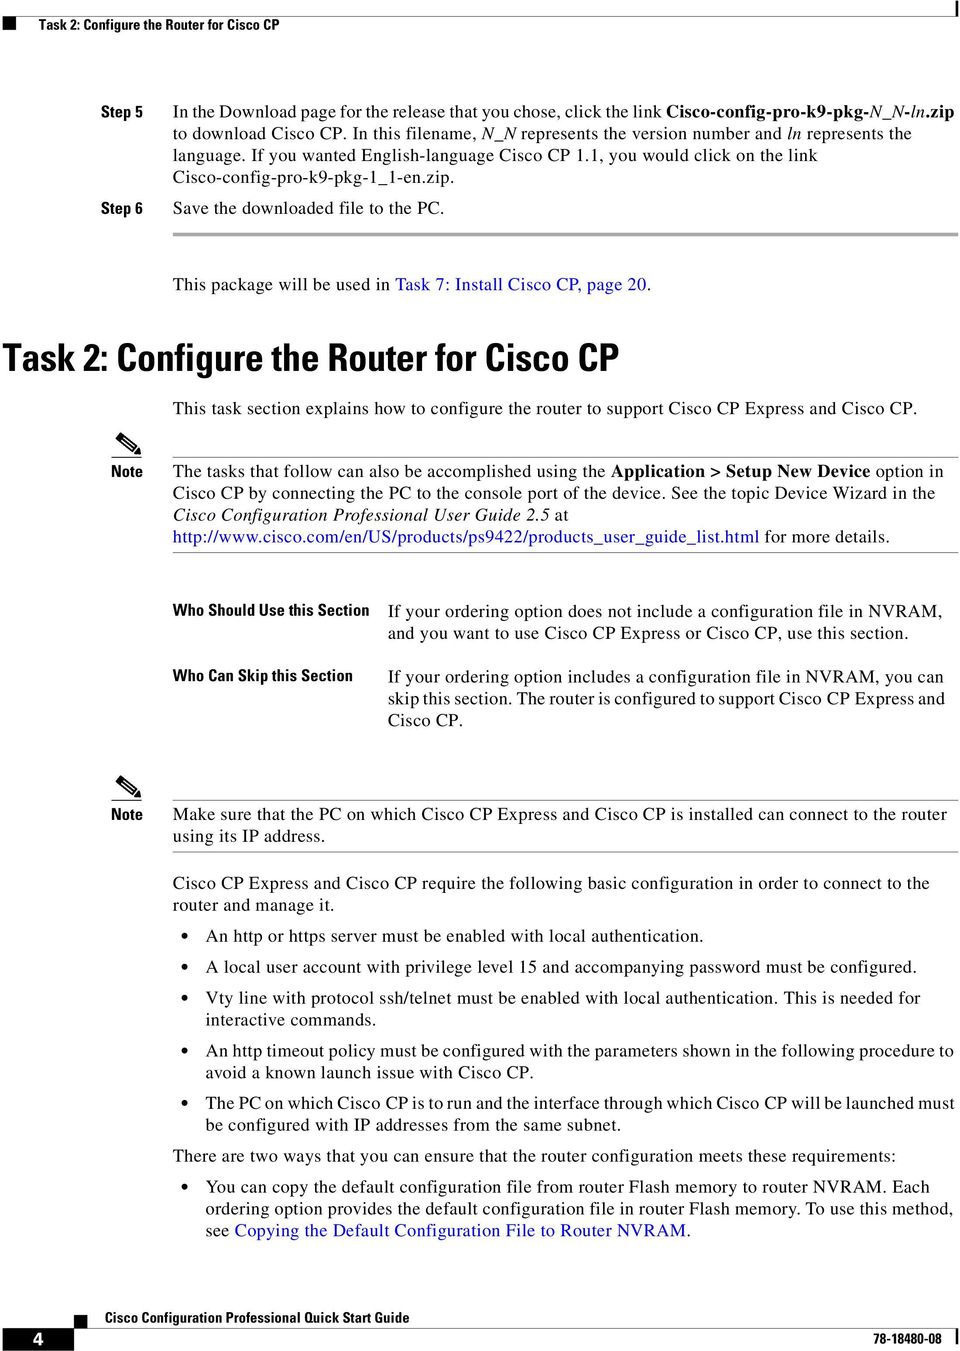 Save the downloaded file to the PC. This package will be used in Task 7: Install Cisco CP, page 20.